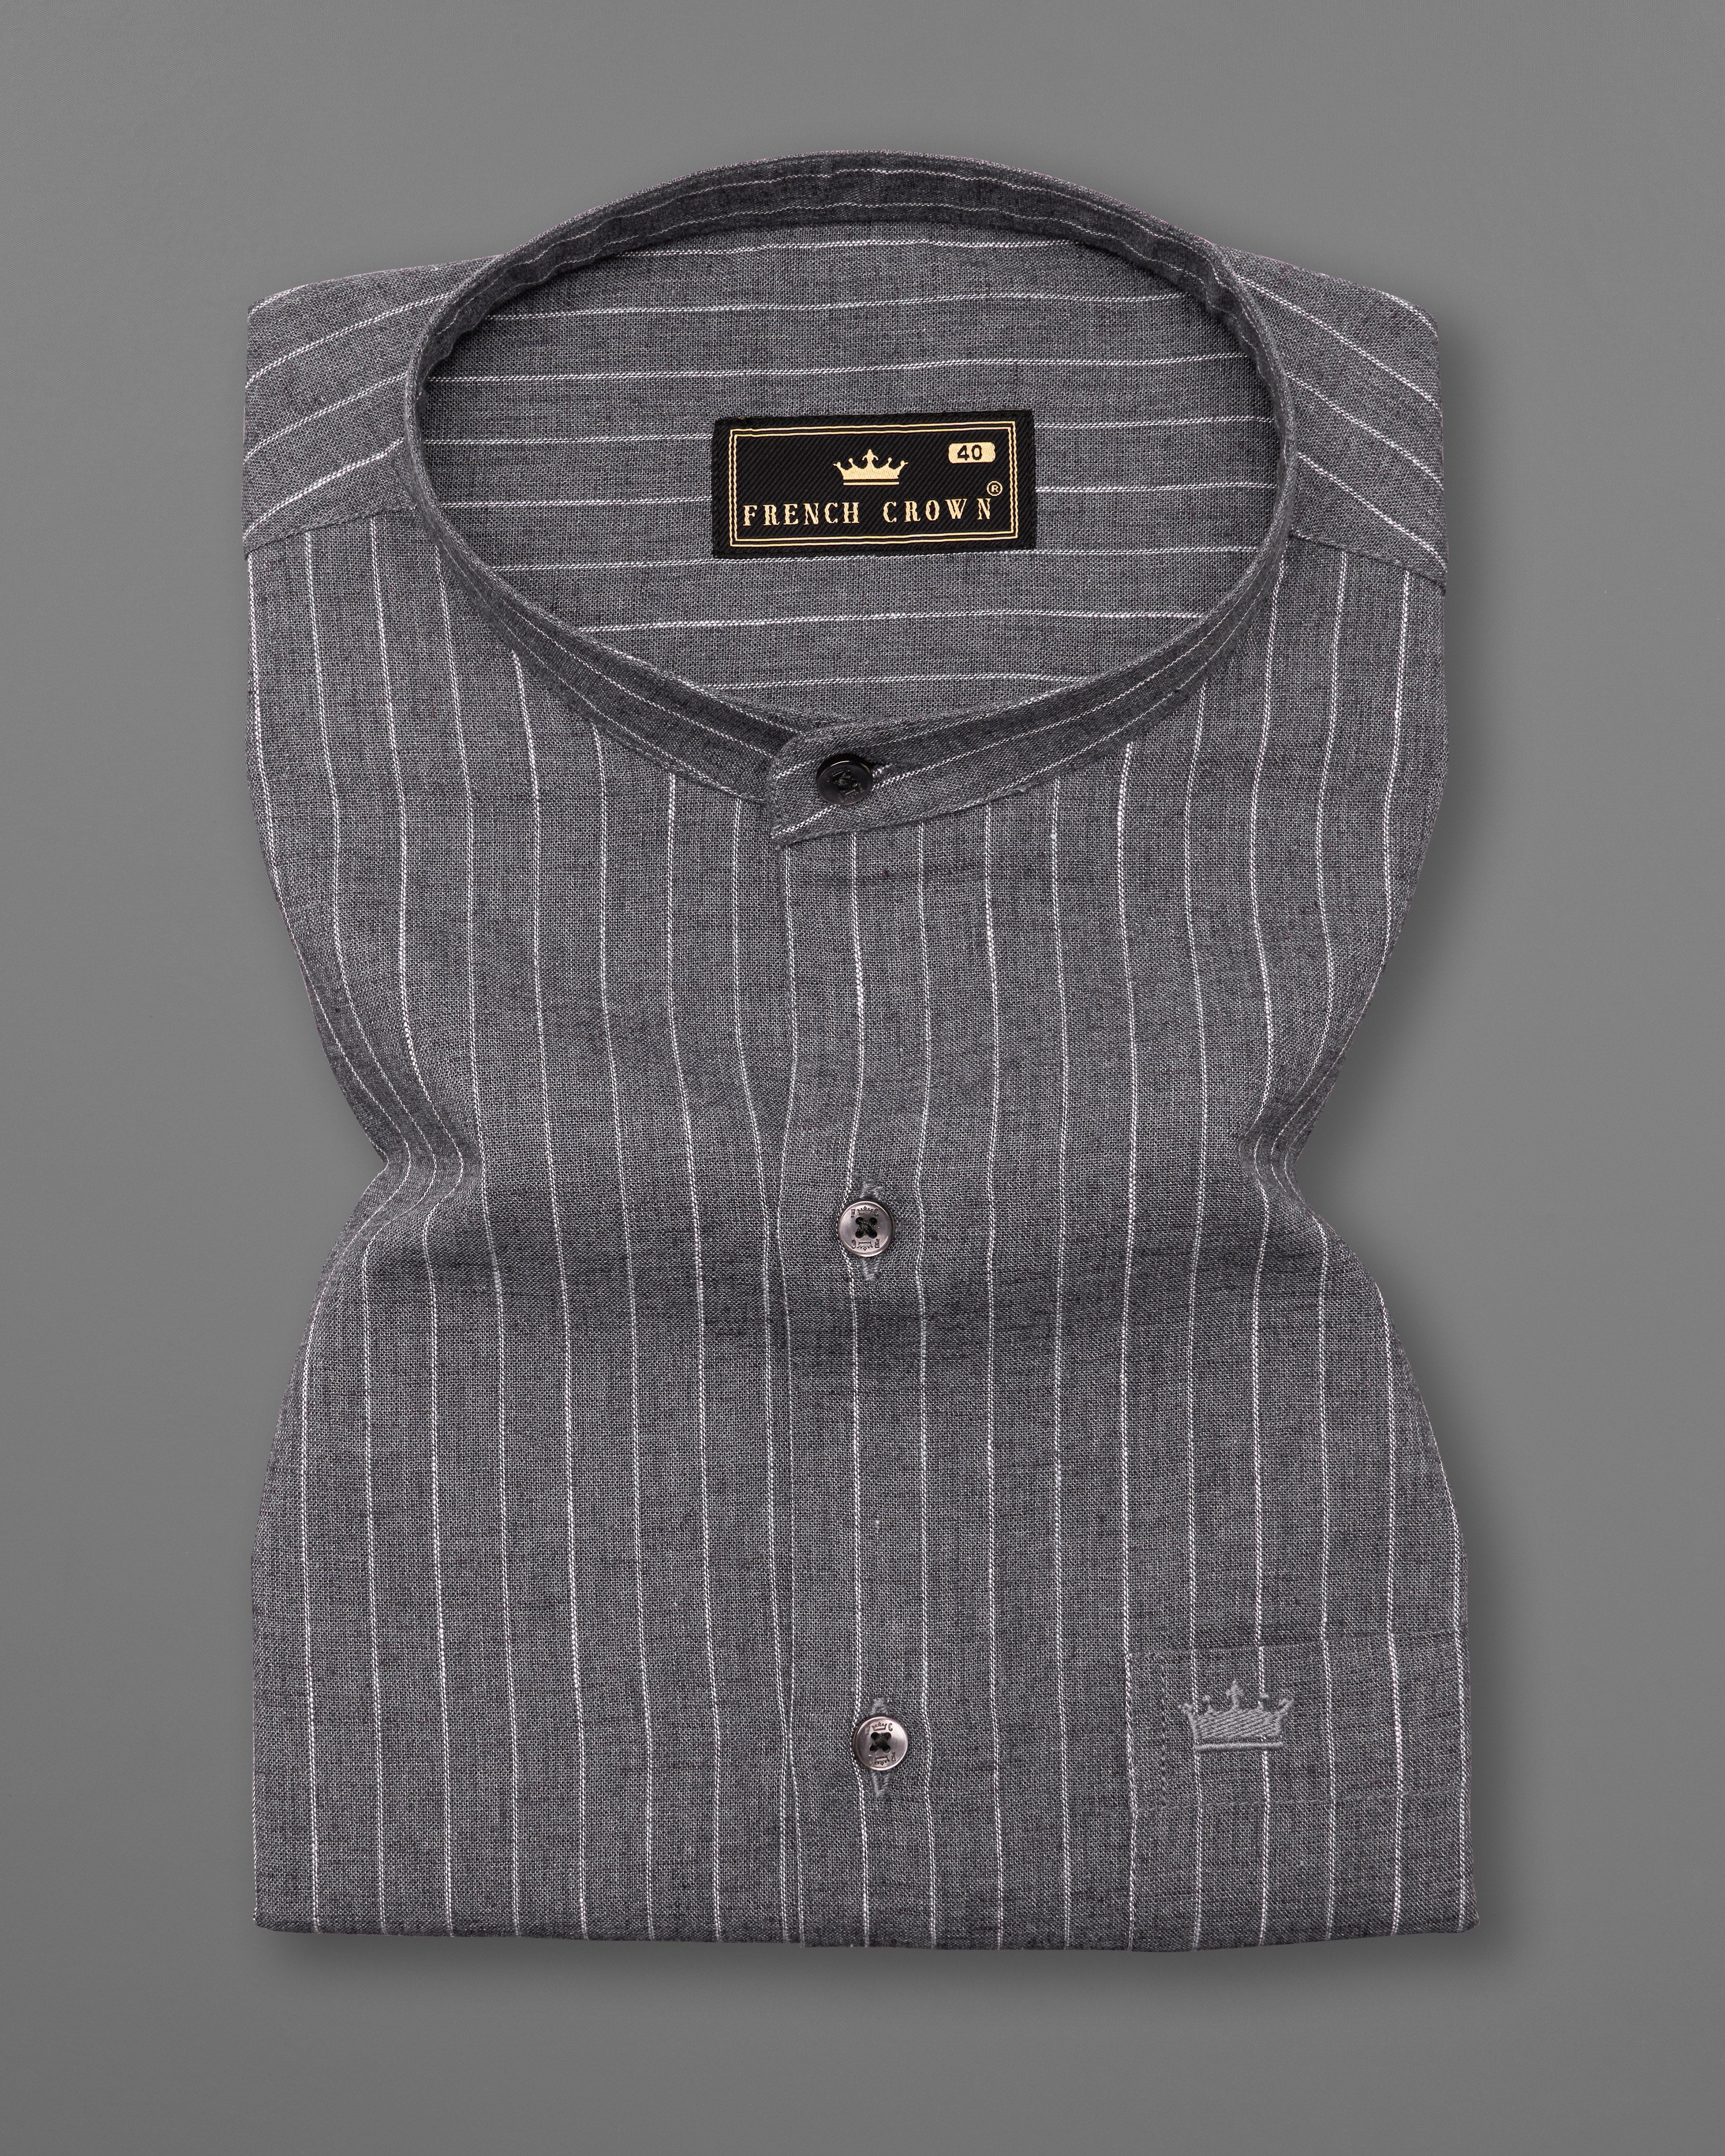 Vampire Gray with White Striped Luxurious Linen Half Slavees Shirt 9641-M-BLK-SS-H-38, 9641-M-BLK-SS-H-39, 9641-M-BLK-SS-H-40, 9641-M-BLK-SS-H-42, 9641-M-BLK-SS-H-44, 9641-M-BLK-SS-H-46, 9641-M-BLK-SS-H-48, 9641-M-BLK-SS-H-50, 9641-M-BLK-SS-H-52